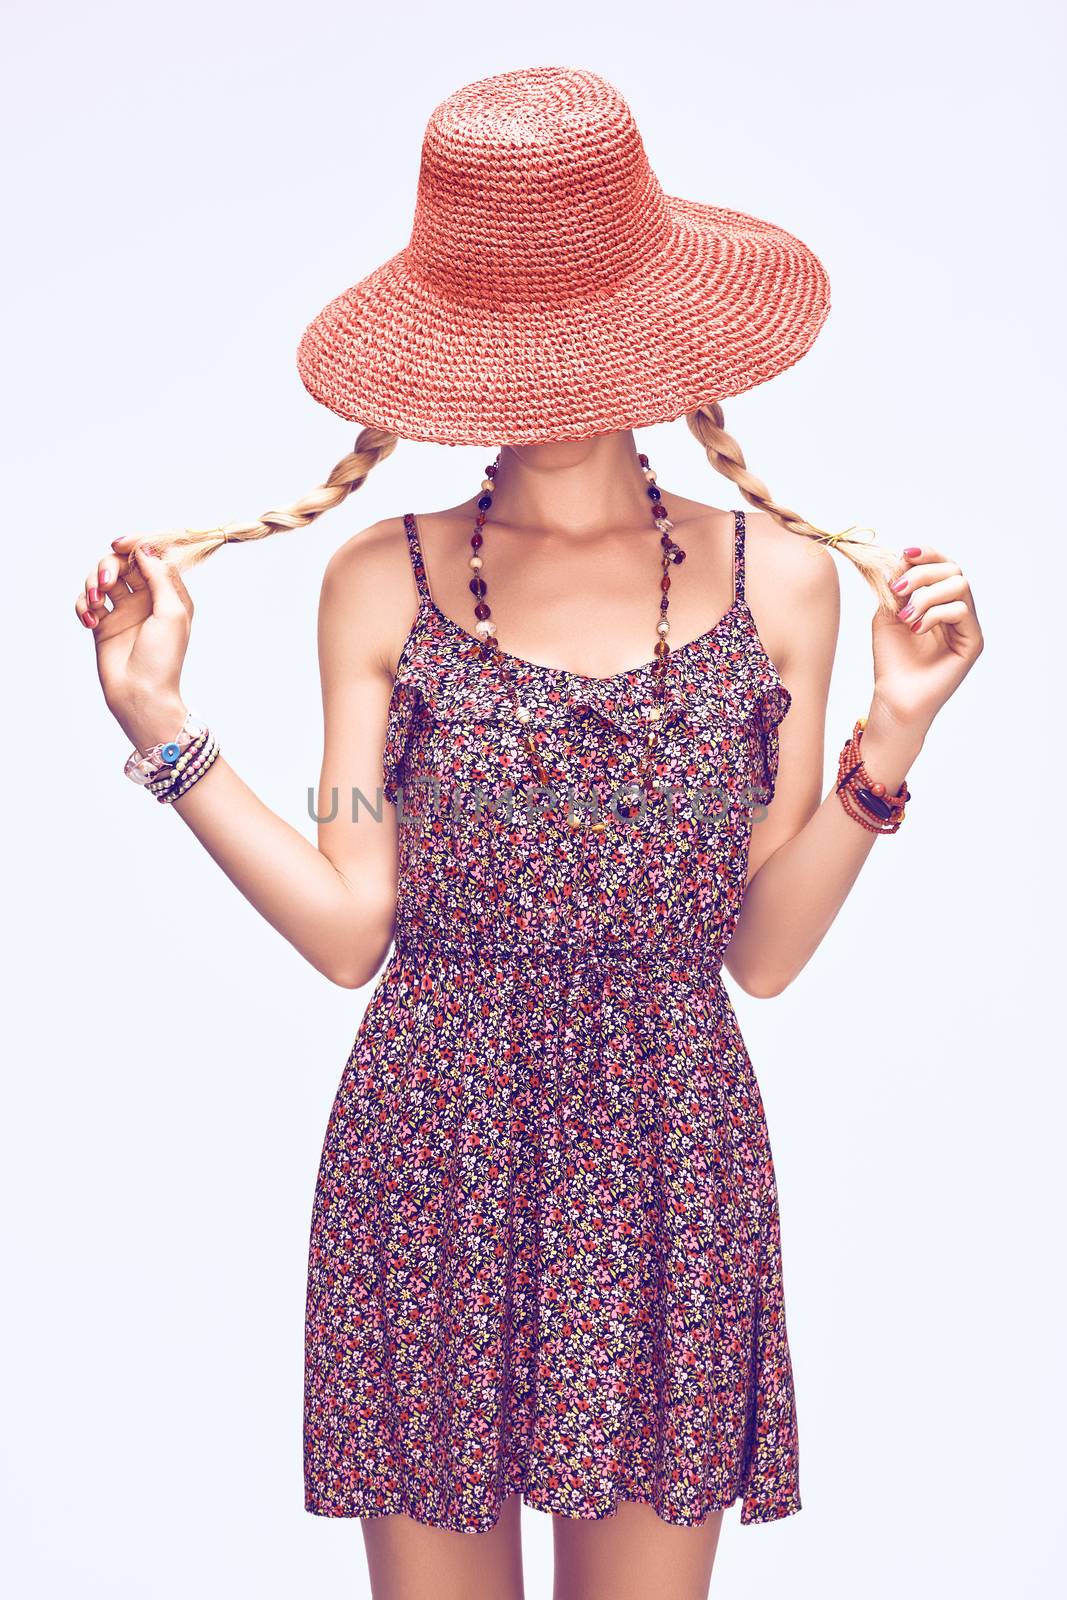 Hippie boho woman in hat. Beauty young playful positive blonde, pigtails, ethnic accessories relax, having fun. Floral sundress, romantic style. Attractive loving girl. Unusual creative,people